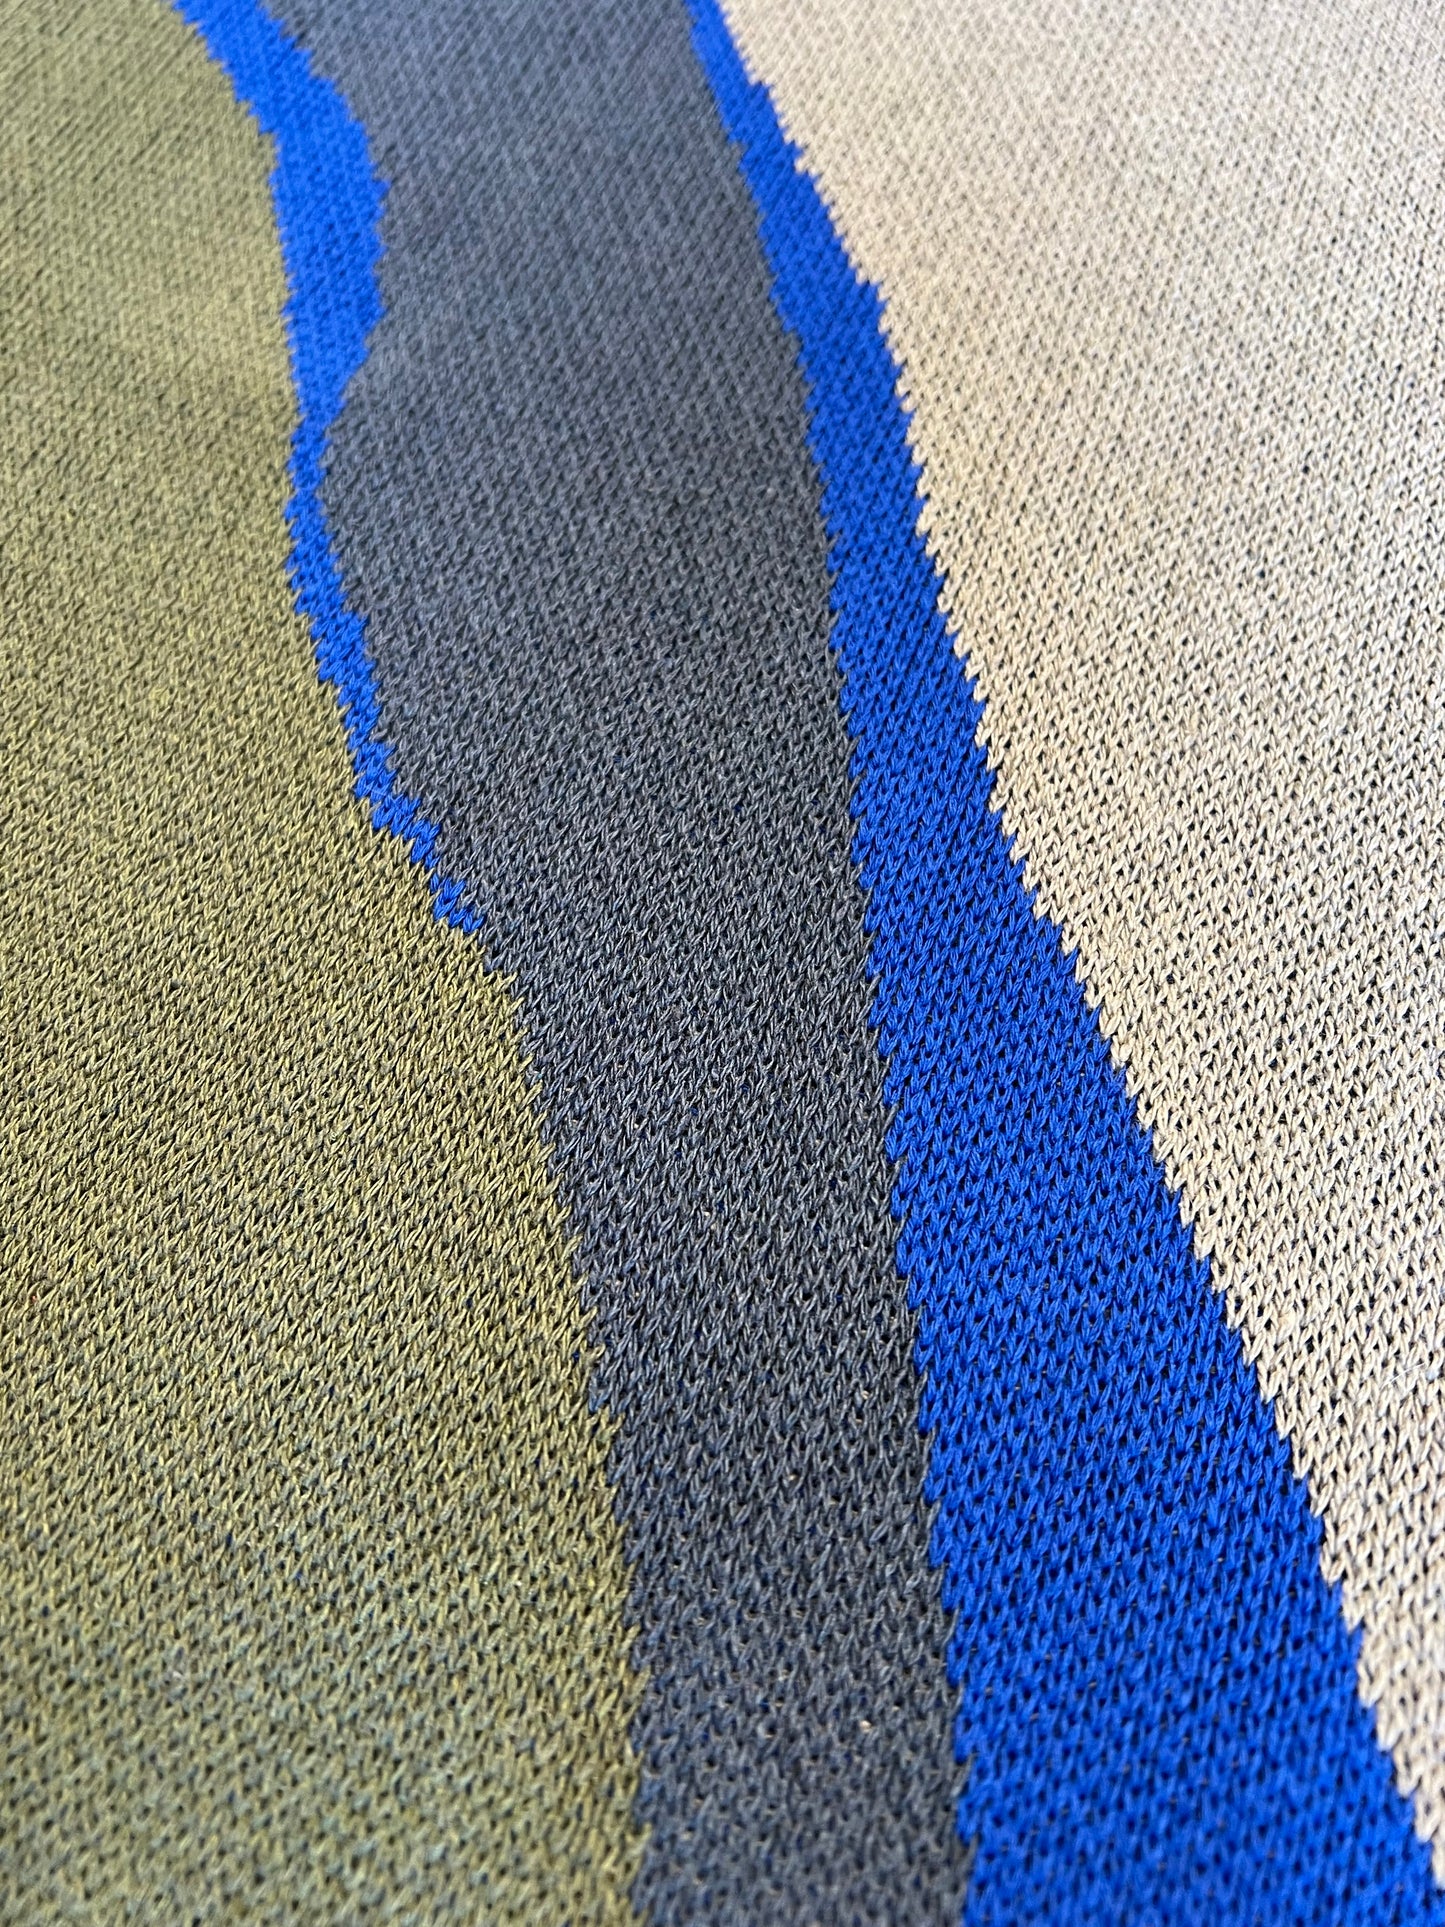 Large Forms Blanket / Khaki and Royal Blue